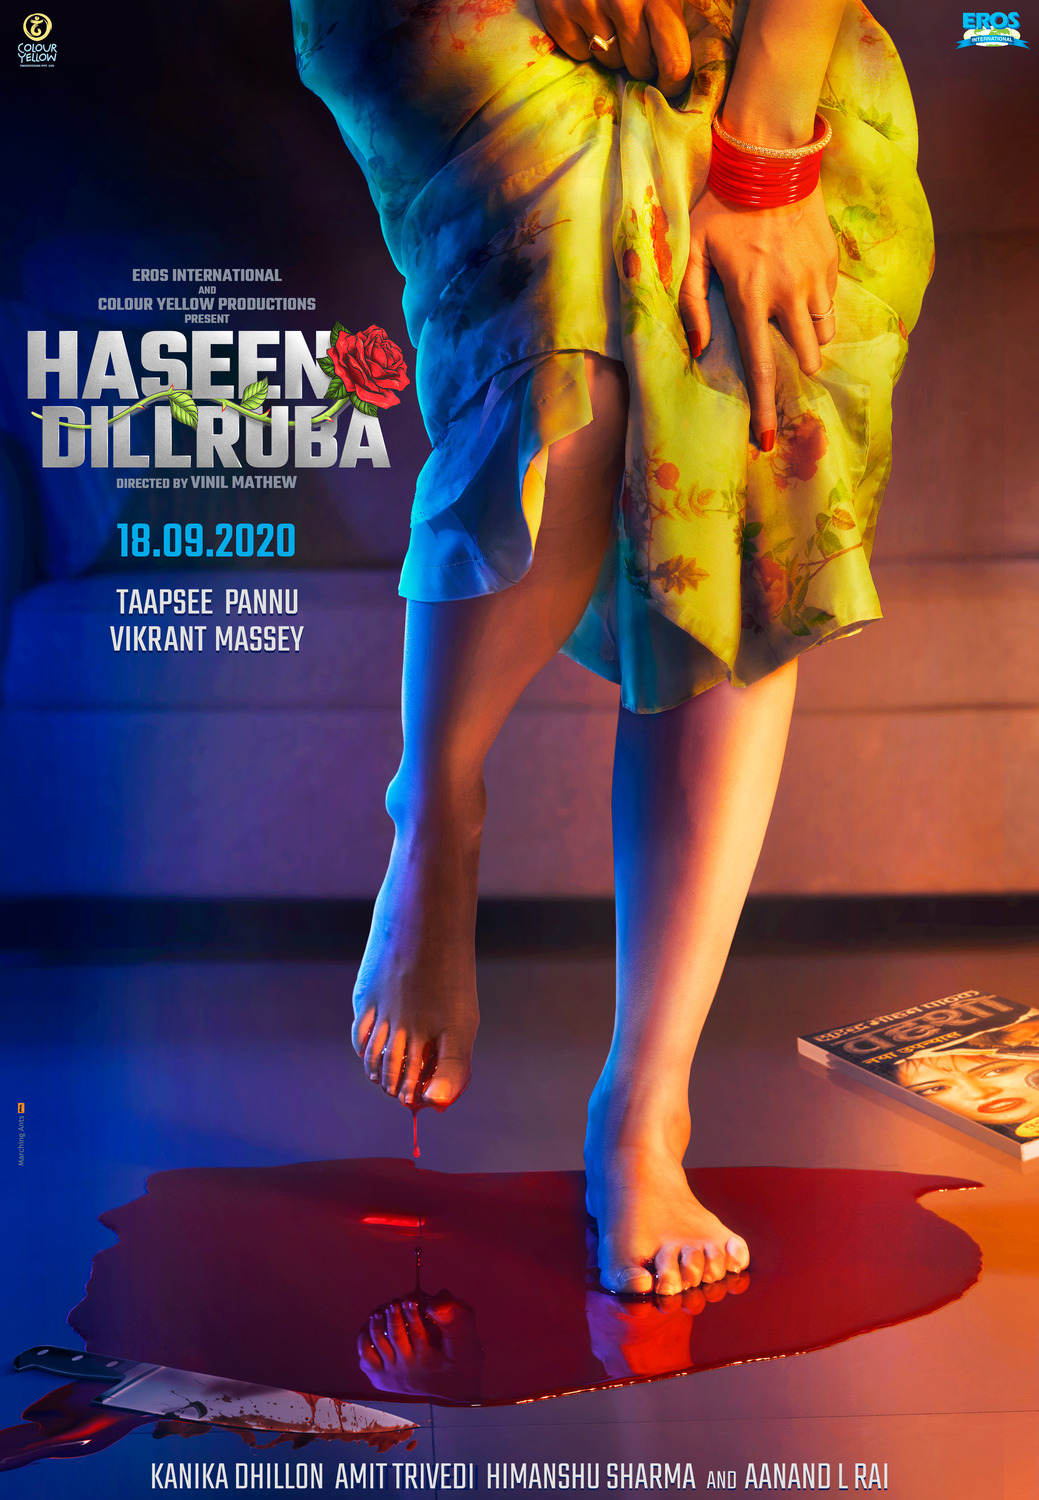 Extra Large Movie Poster Image for Haseen Dillruba 